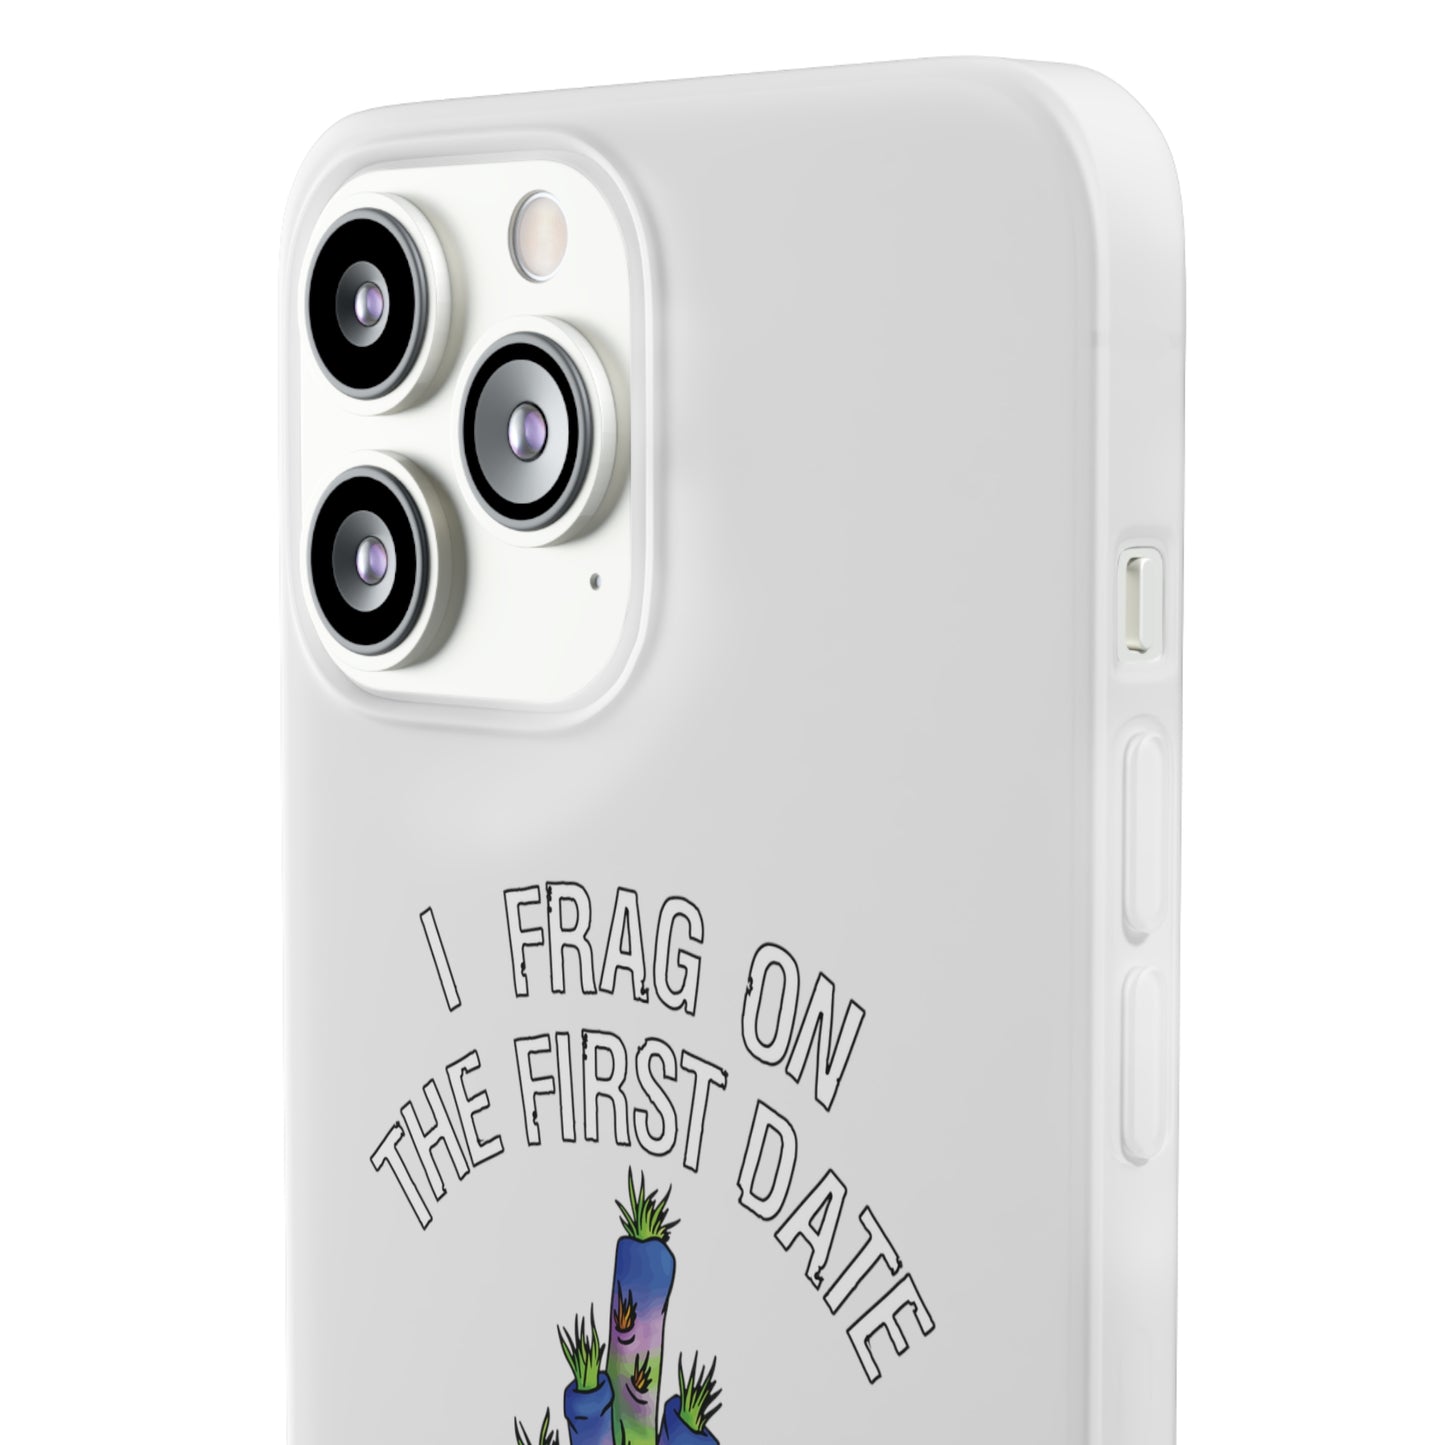 "I Frag On The First Date" Acropora Frag Cell Phone Flexi Case